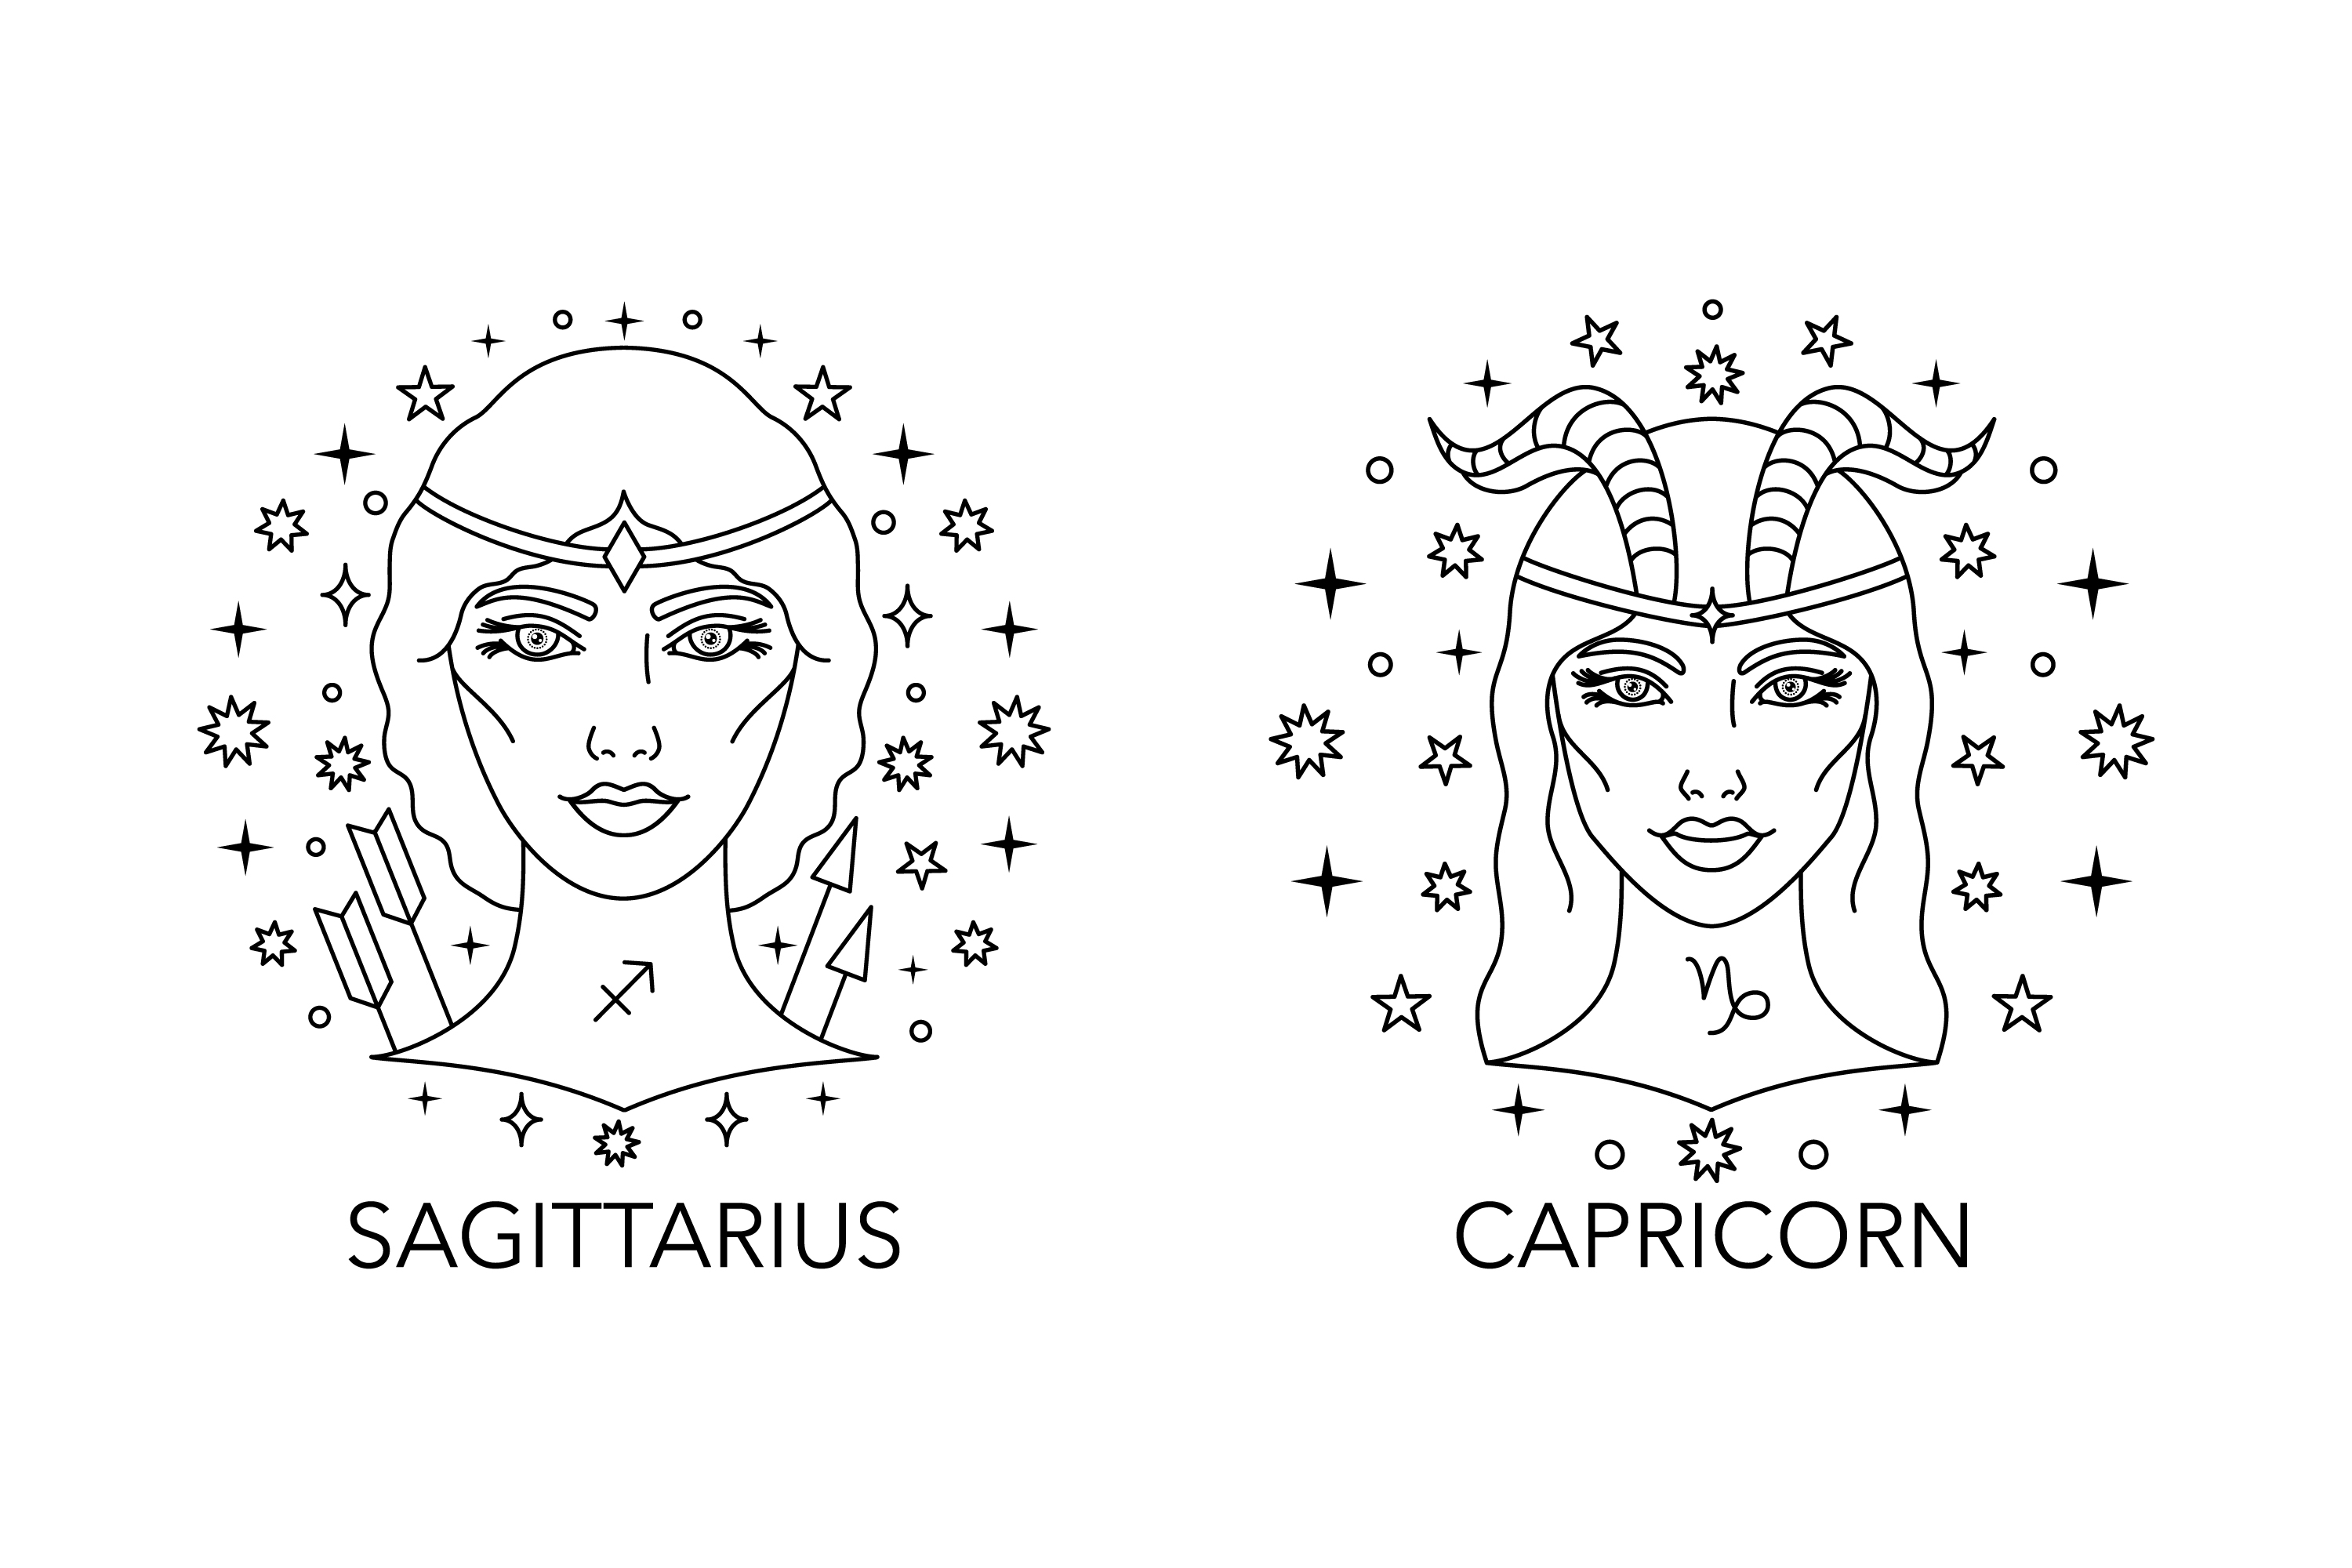 Two zodiac signs are shown in black and white.